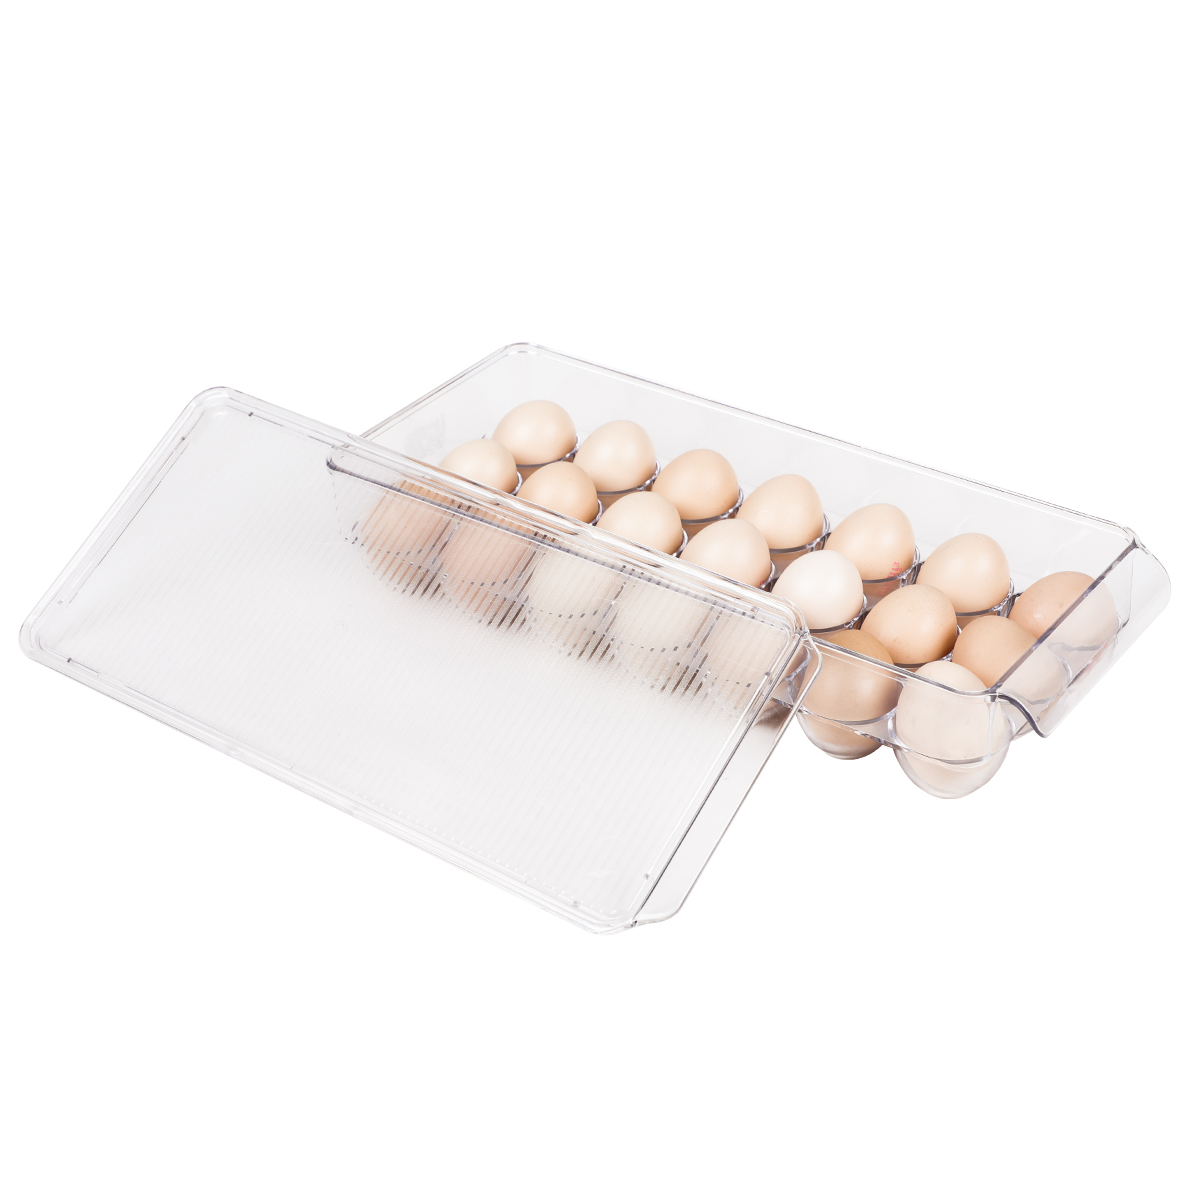 Egg Storage Bins With Lids Set of 2 Pieces